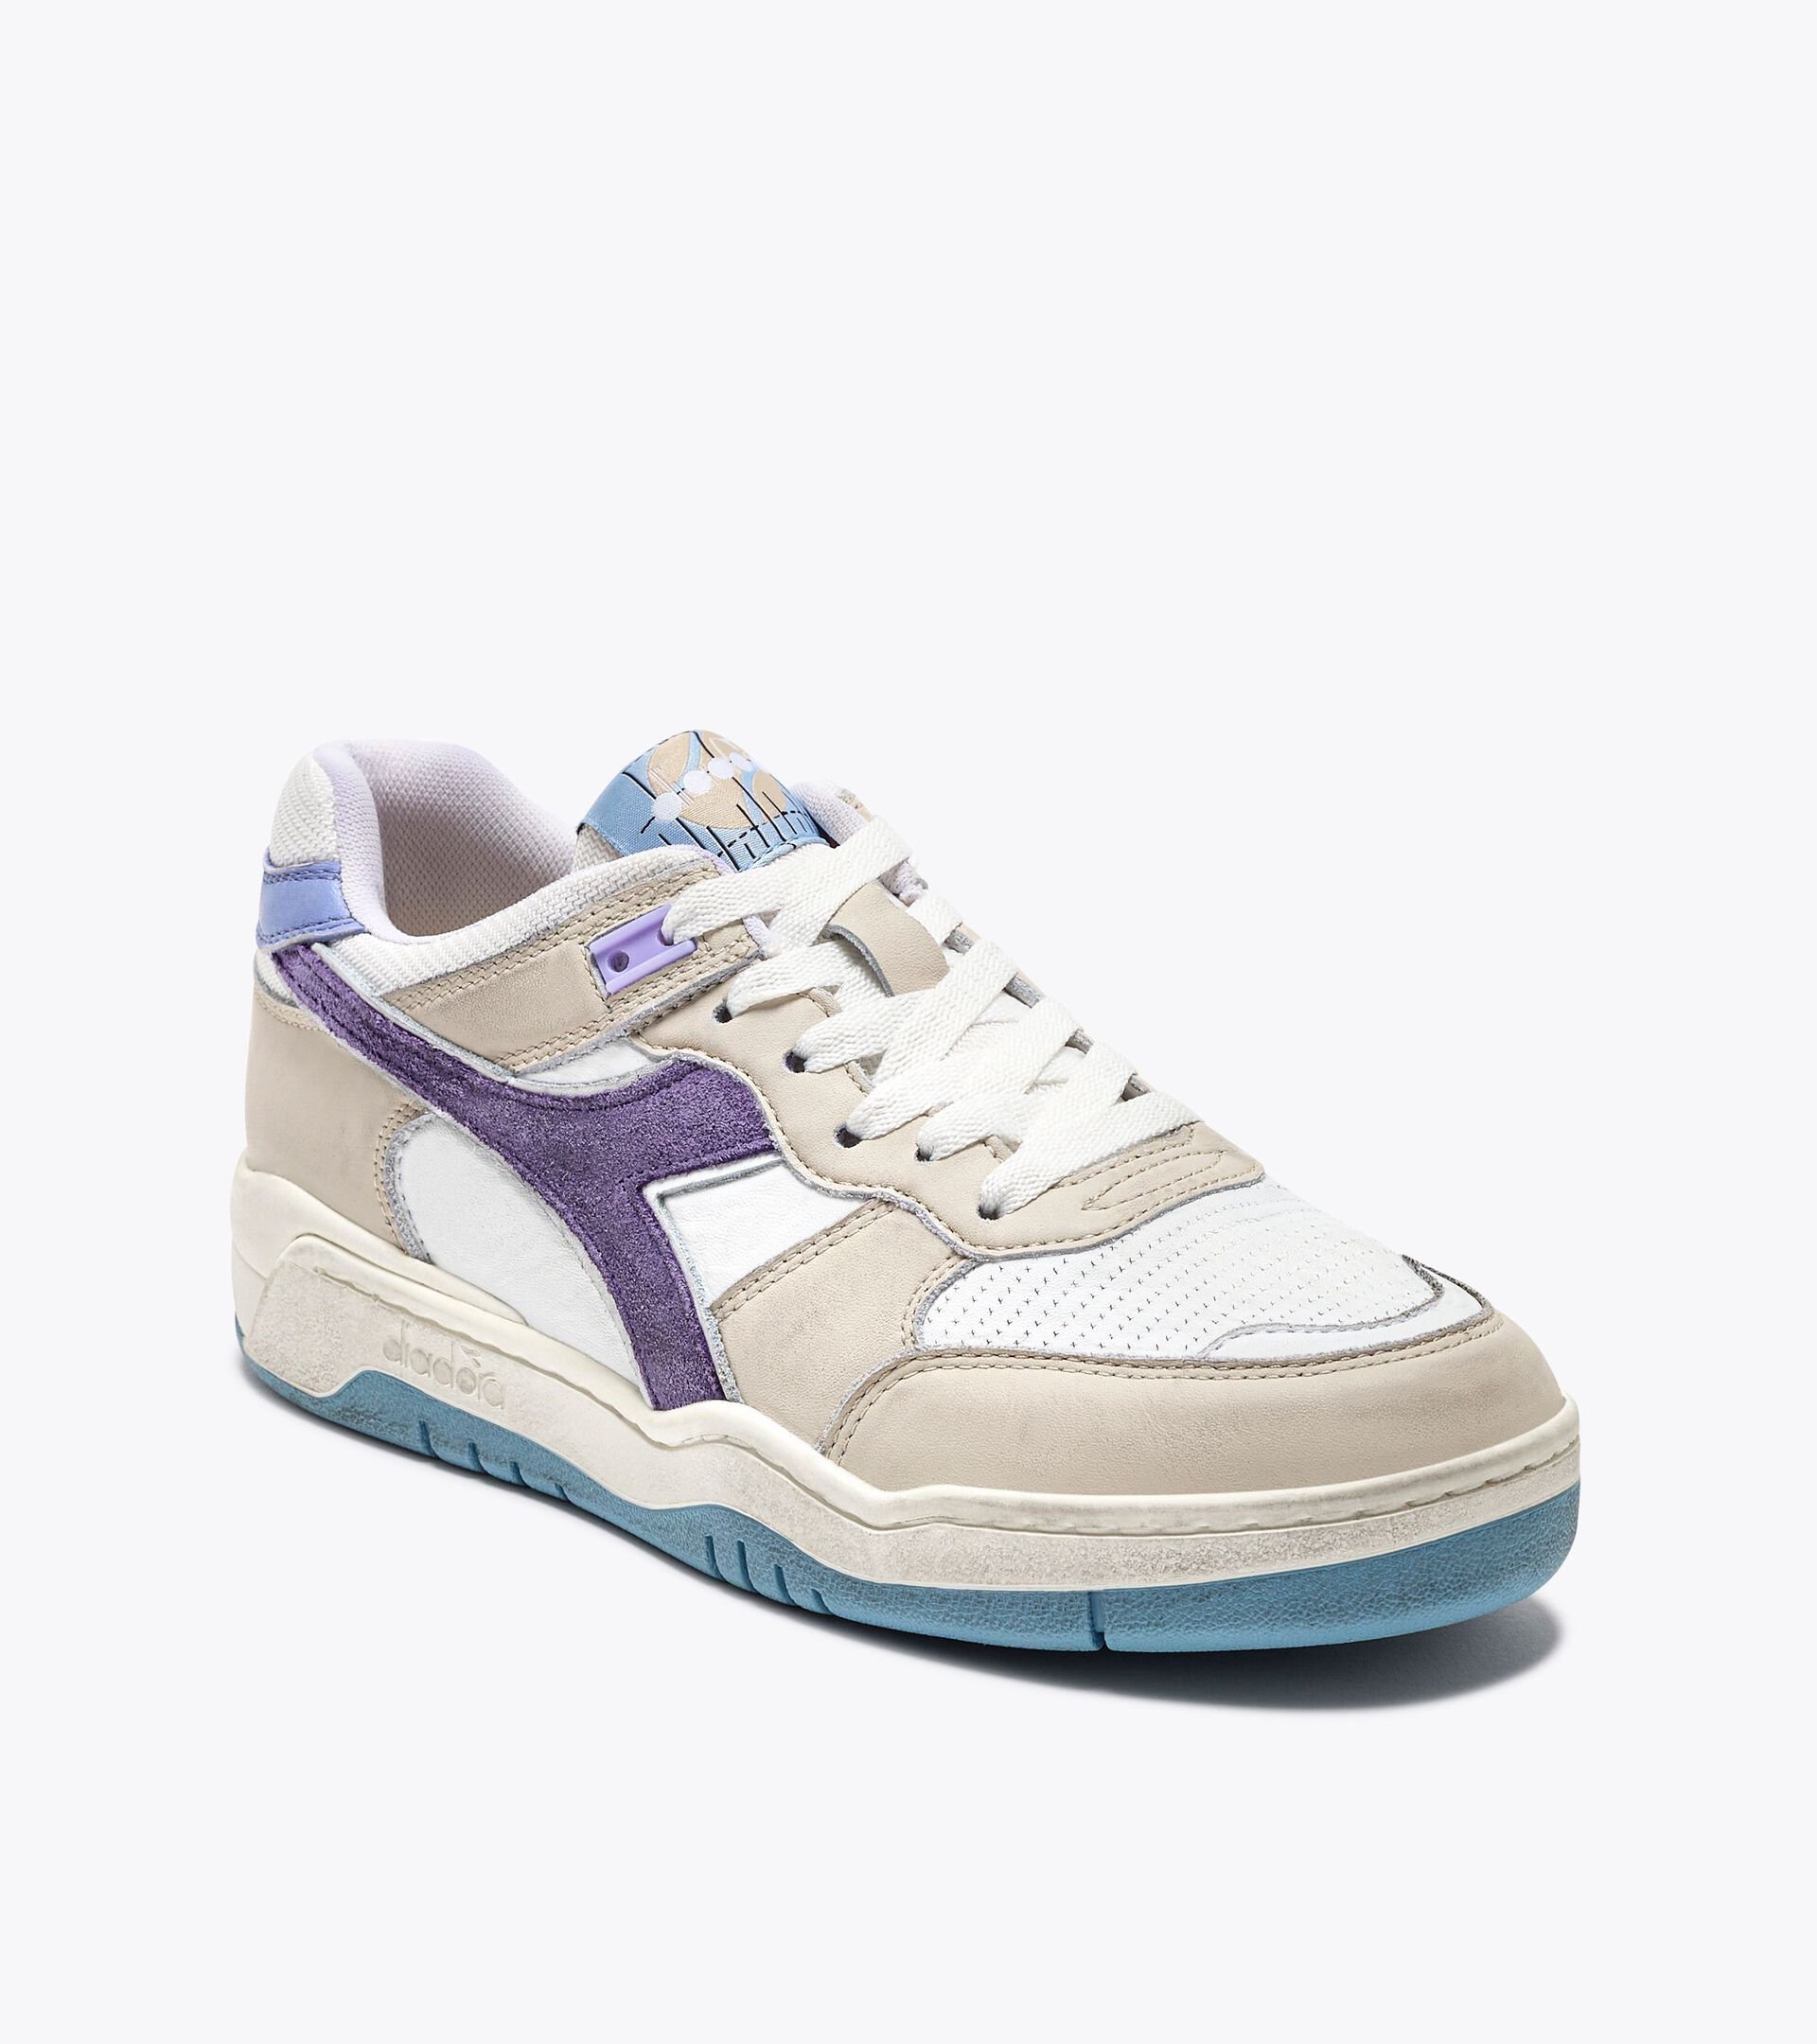 Chaussures Heritage - Gender neutral B.560 USED BLANC/RAYON DE LUNE - Diadora